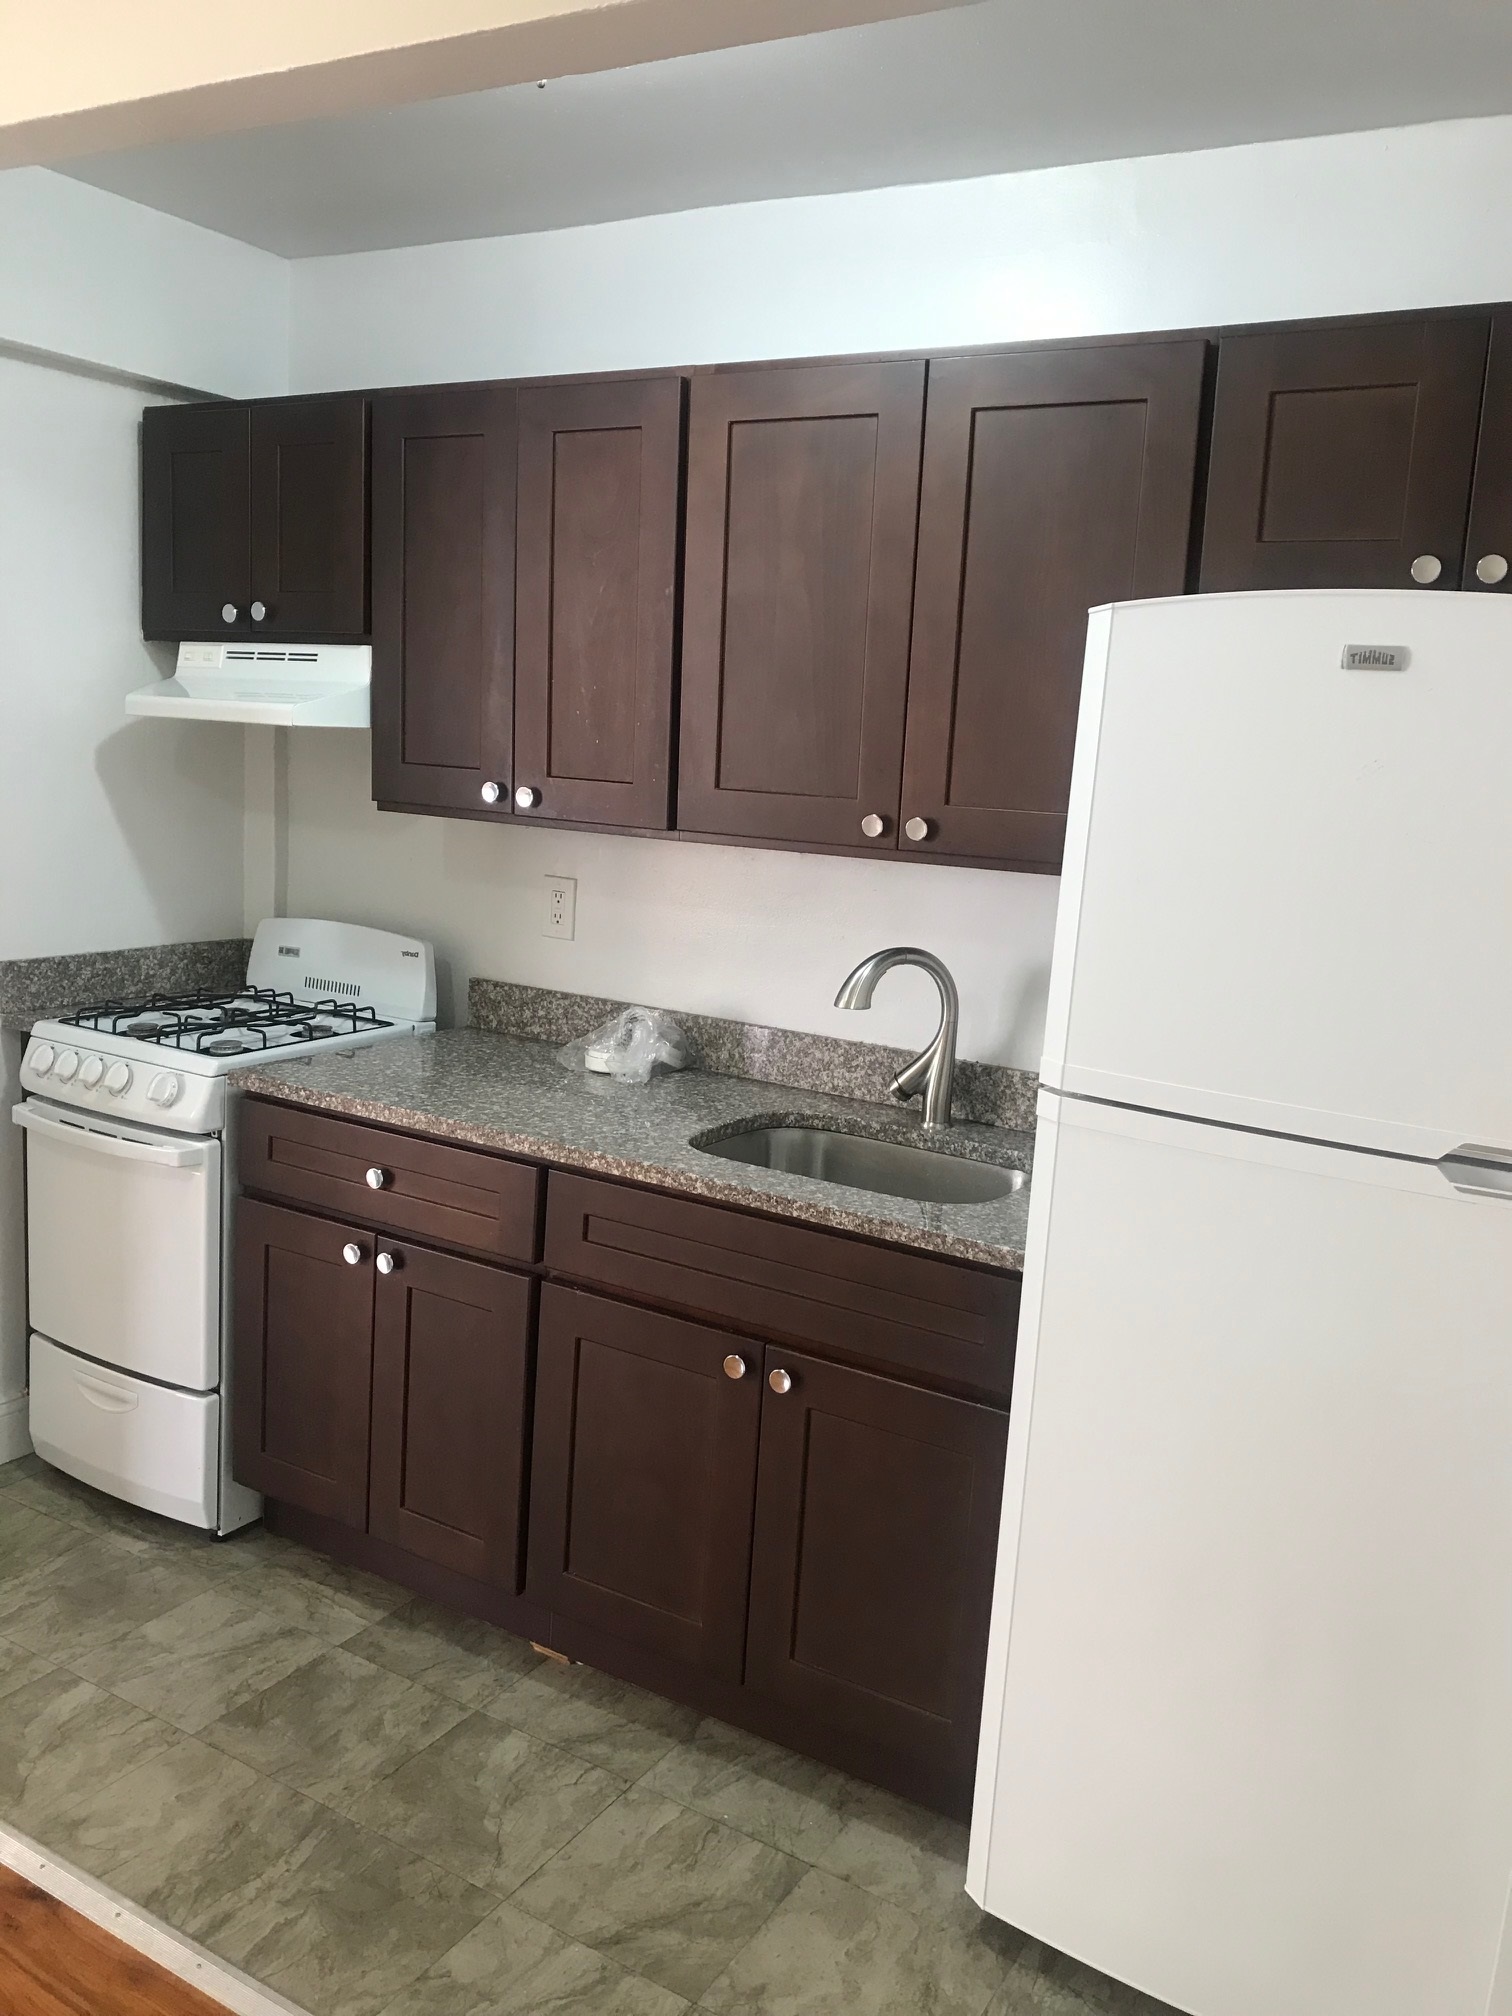 Apartment in Flushing - 41st Avenue  Queens, NY 11355